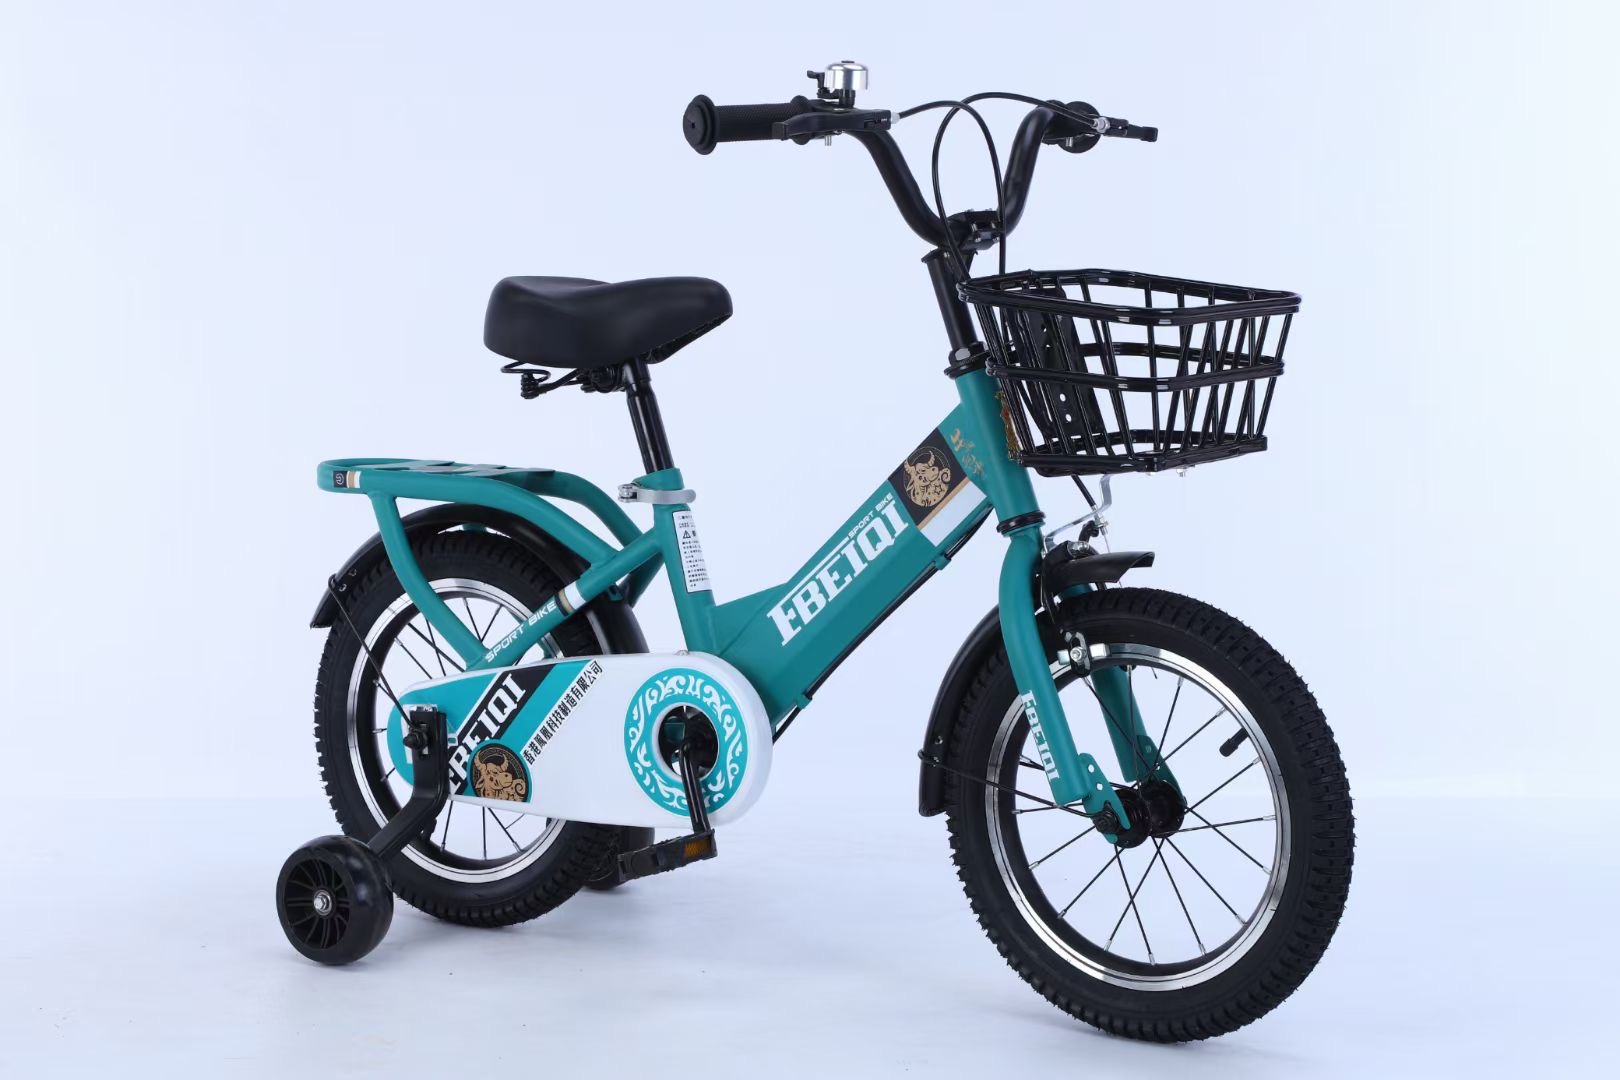 wholesale CE hot sale kids bikes /OEM custom cheap baby children bicycle bike /beautiful 3 to 5 years old cycle for girl